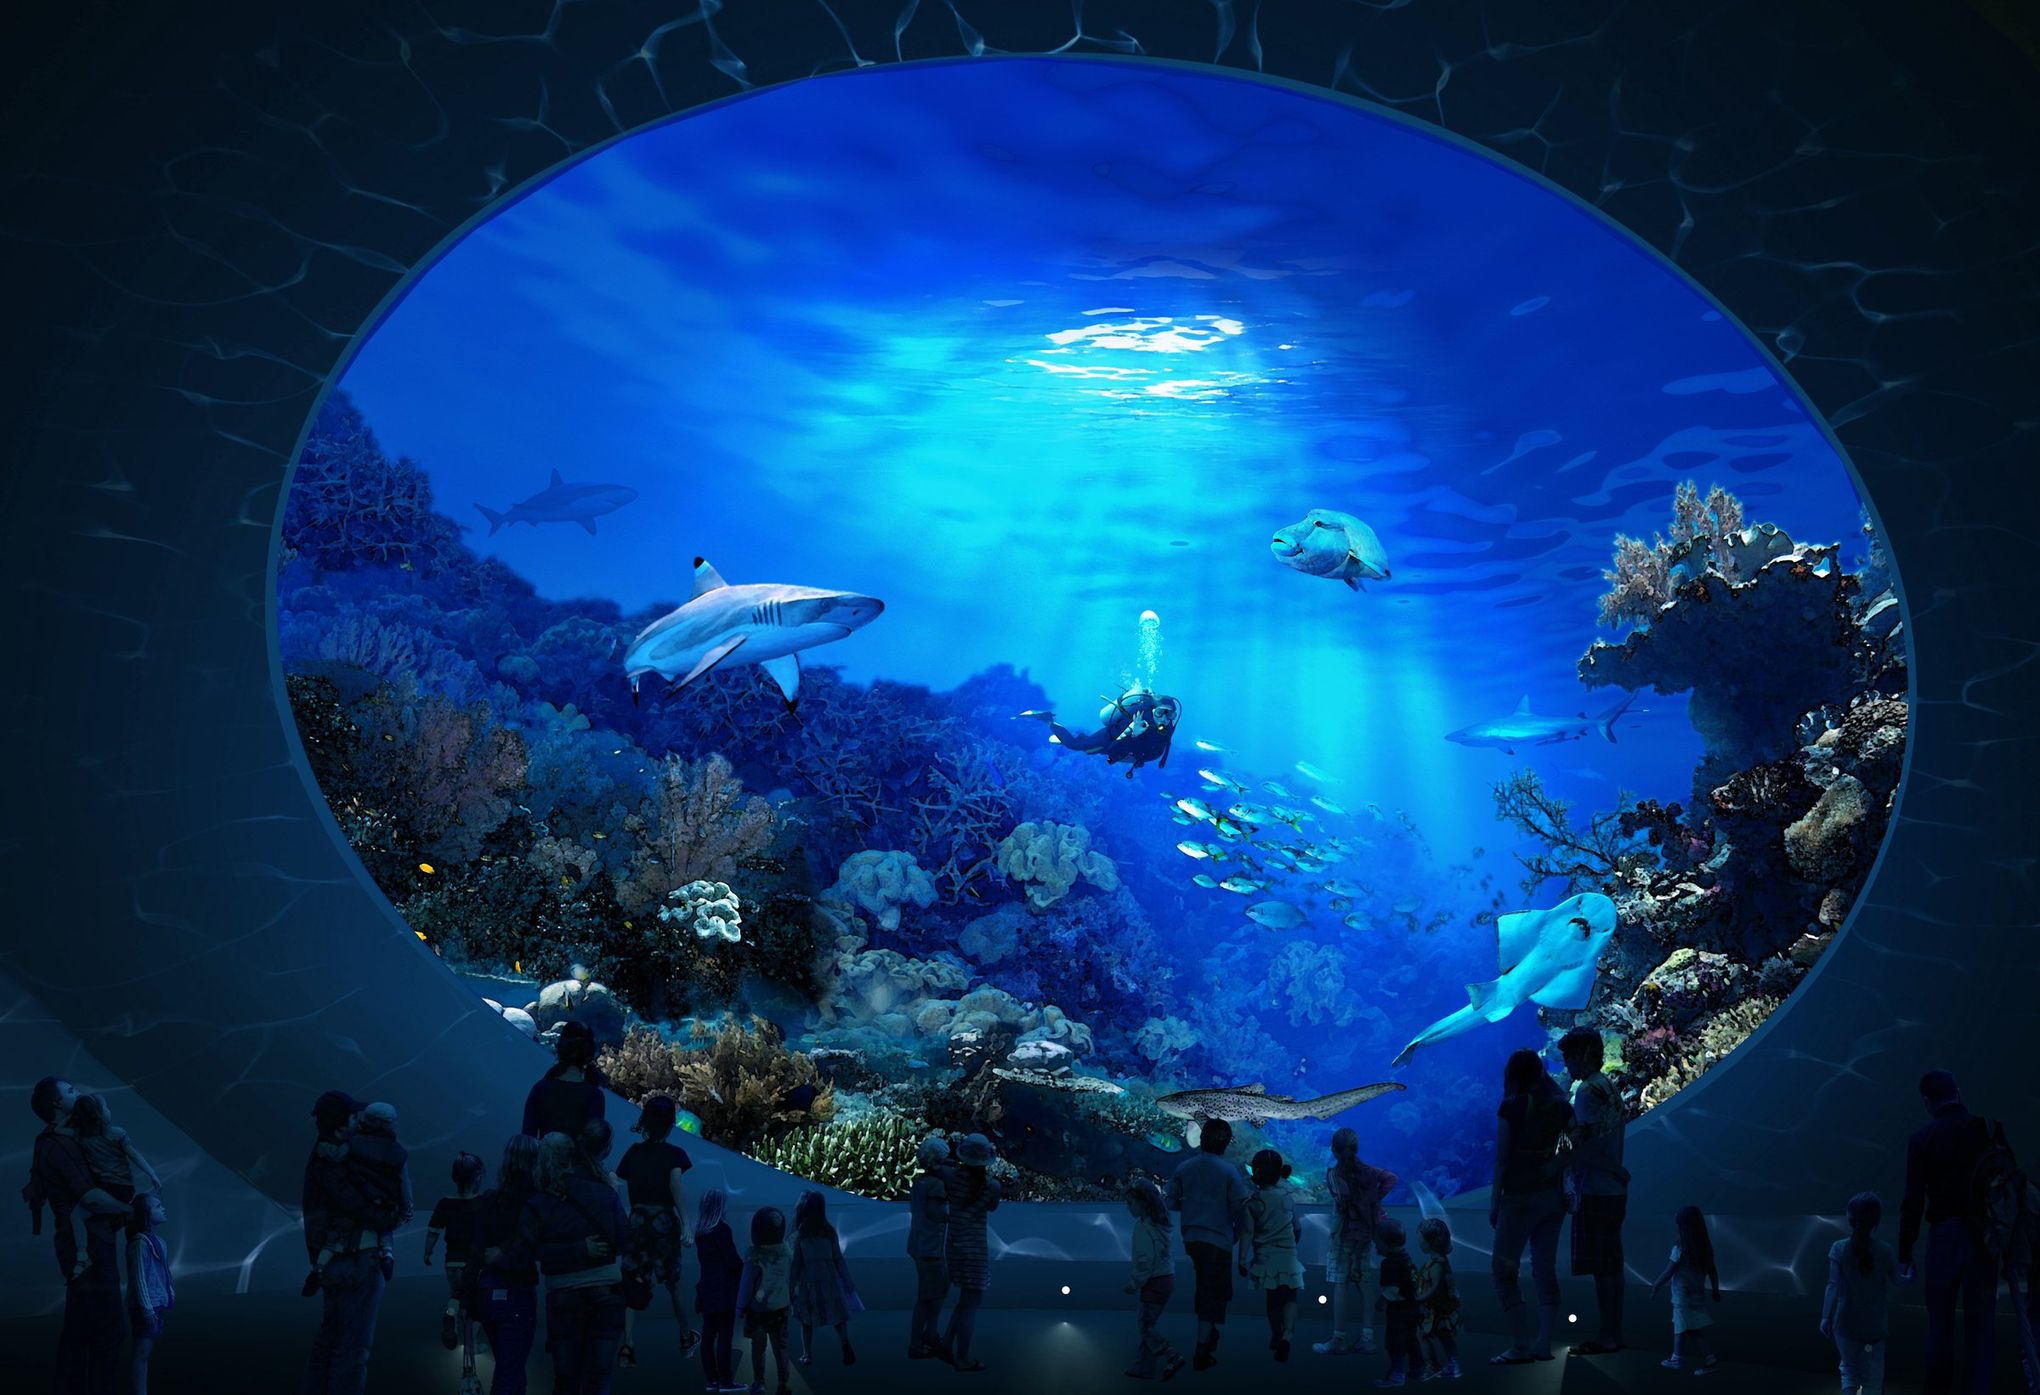 Seattle Aquarium plans $113 million pavilion with sharks, sting rays for  new waterfront promenade